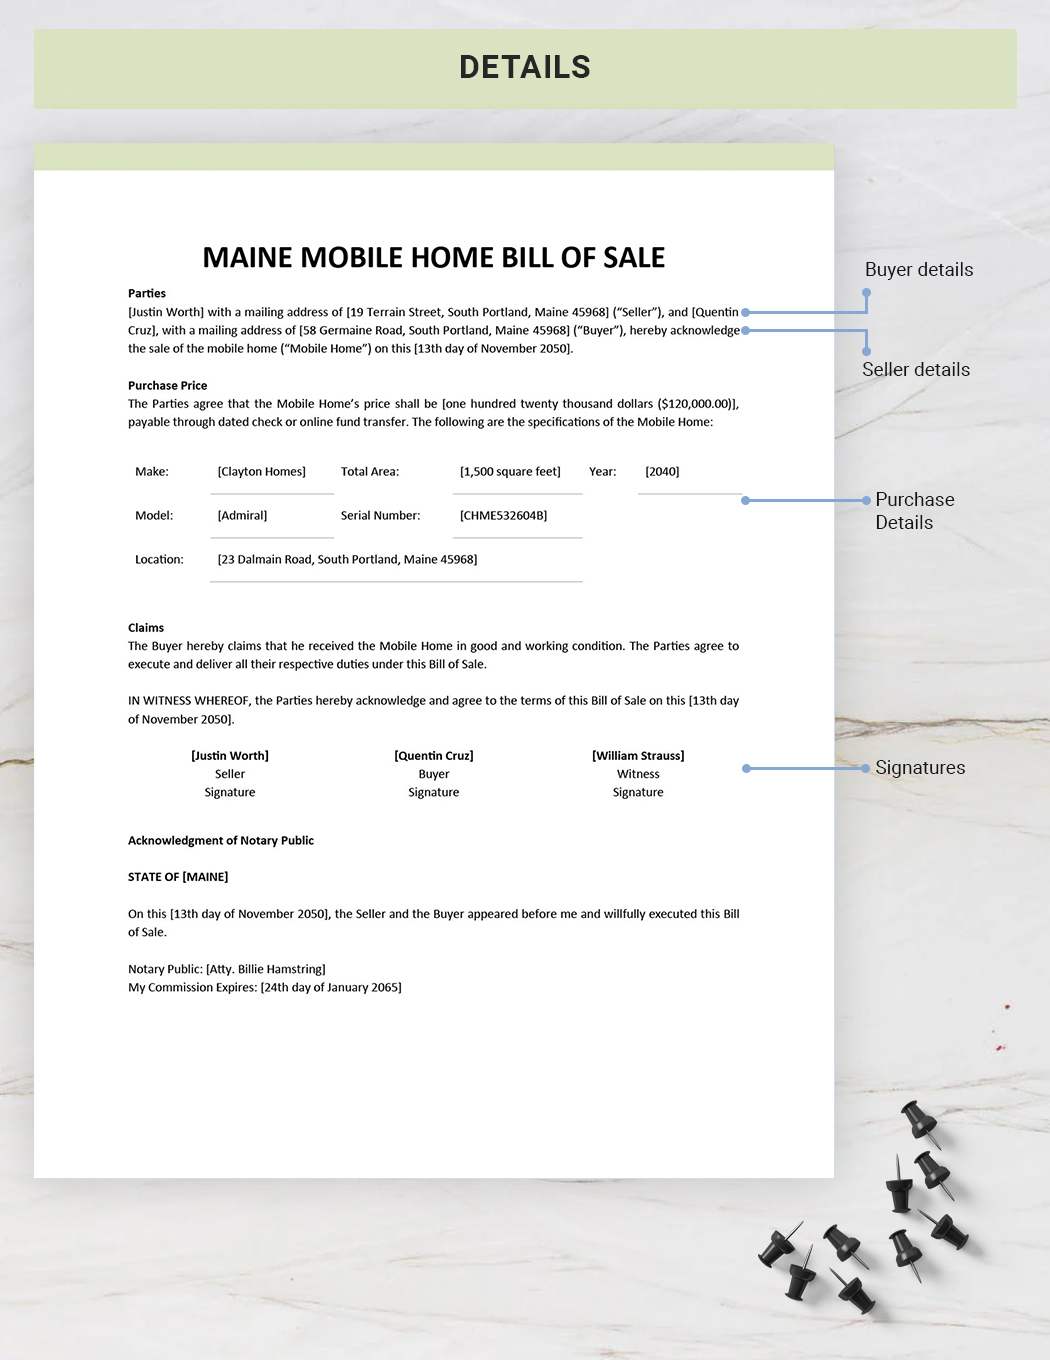 Maine Mobile Home Bill of Sale Template